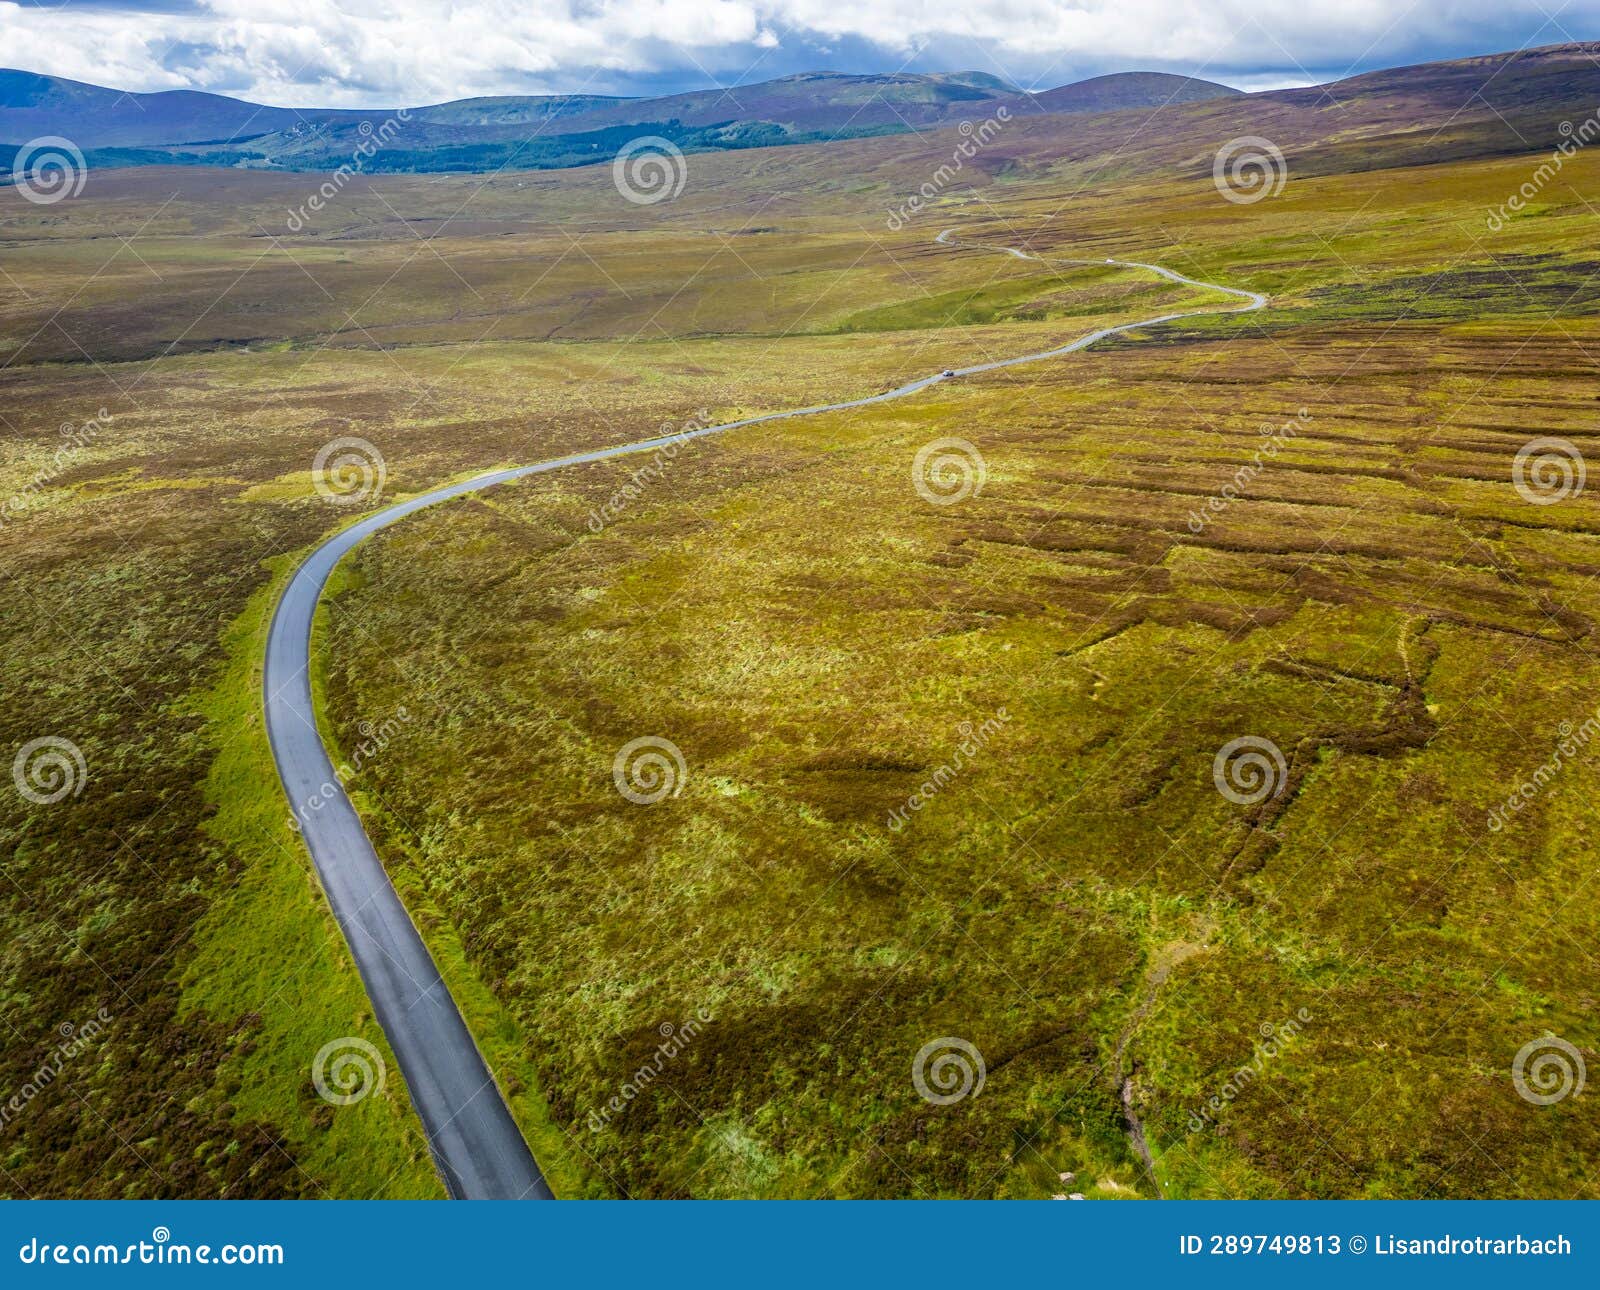 aerialview of road, bogs with mountains in background in sally gap